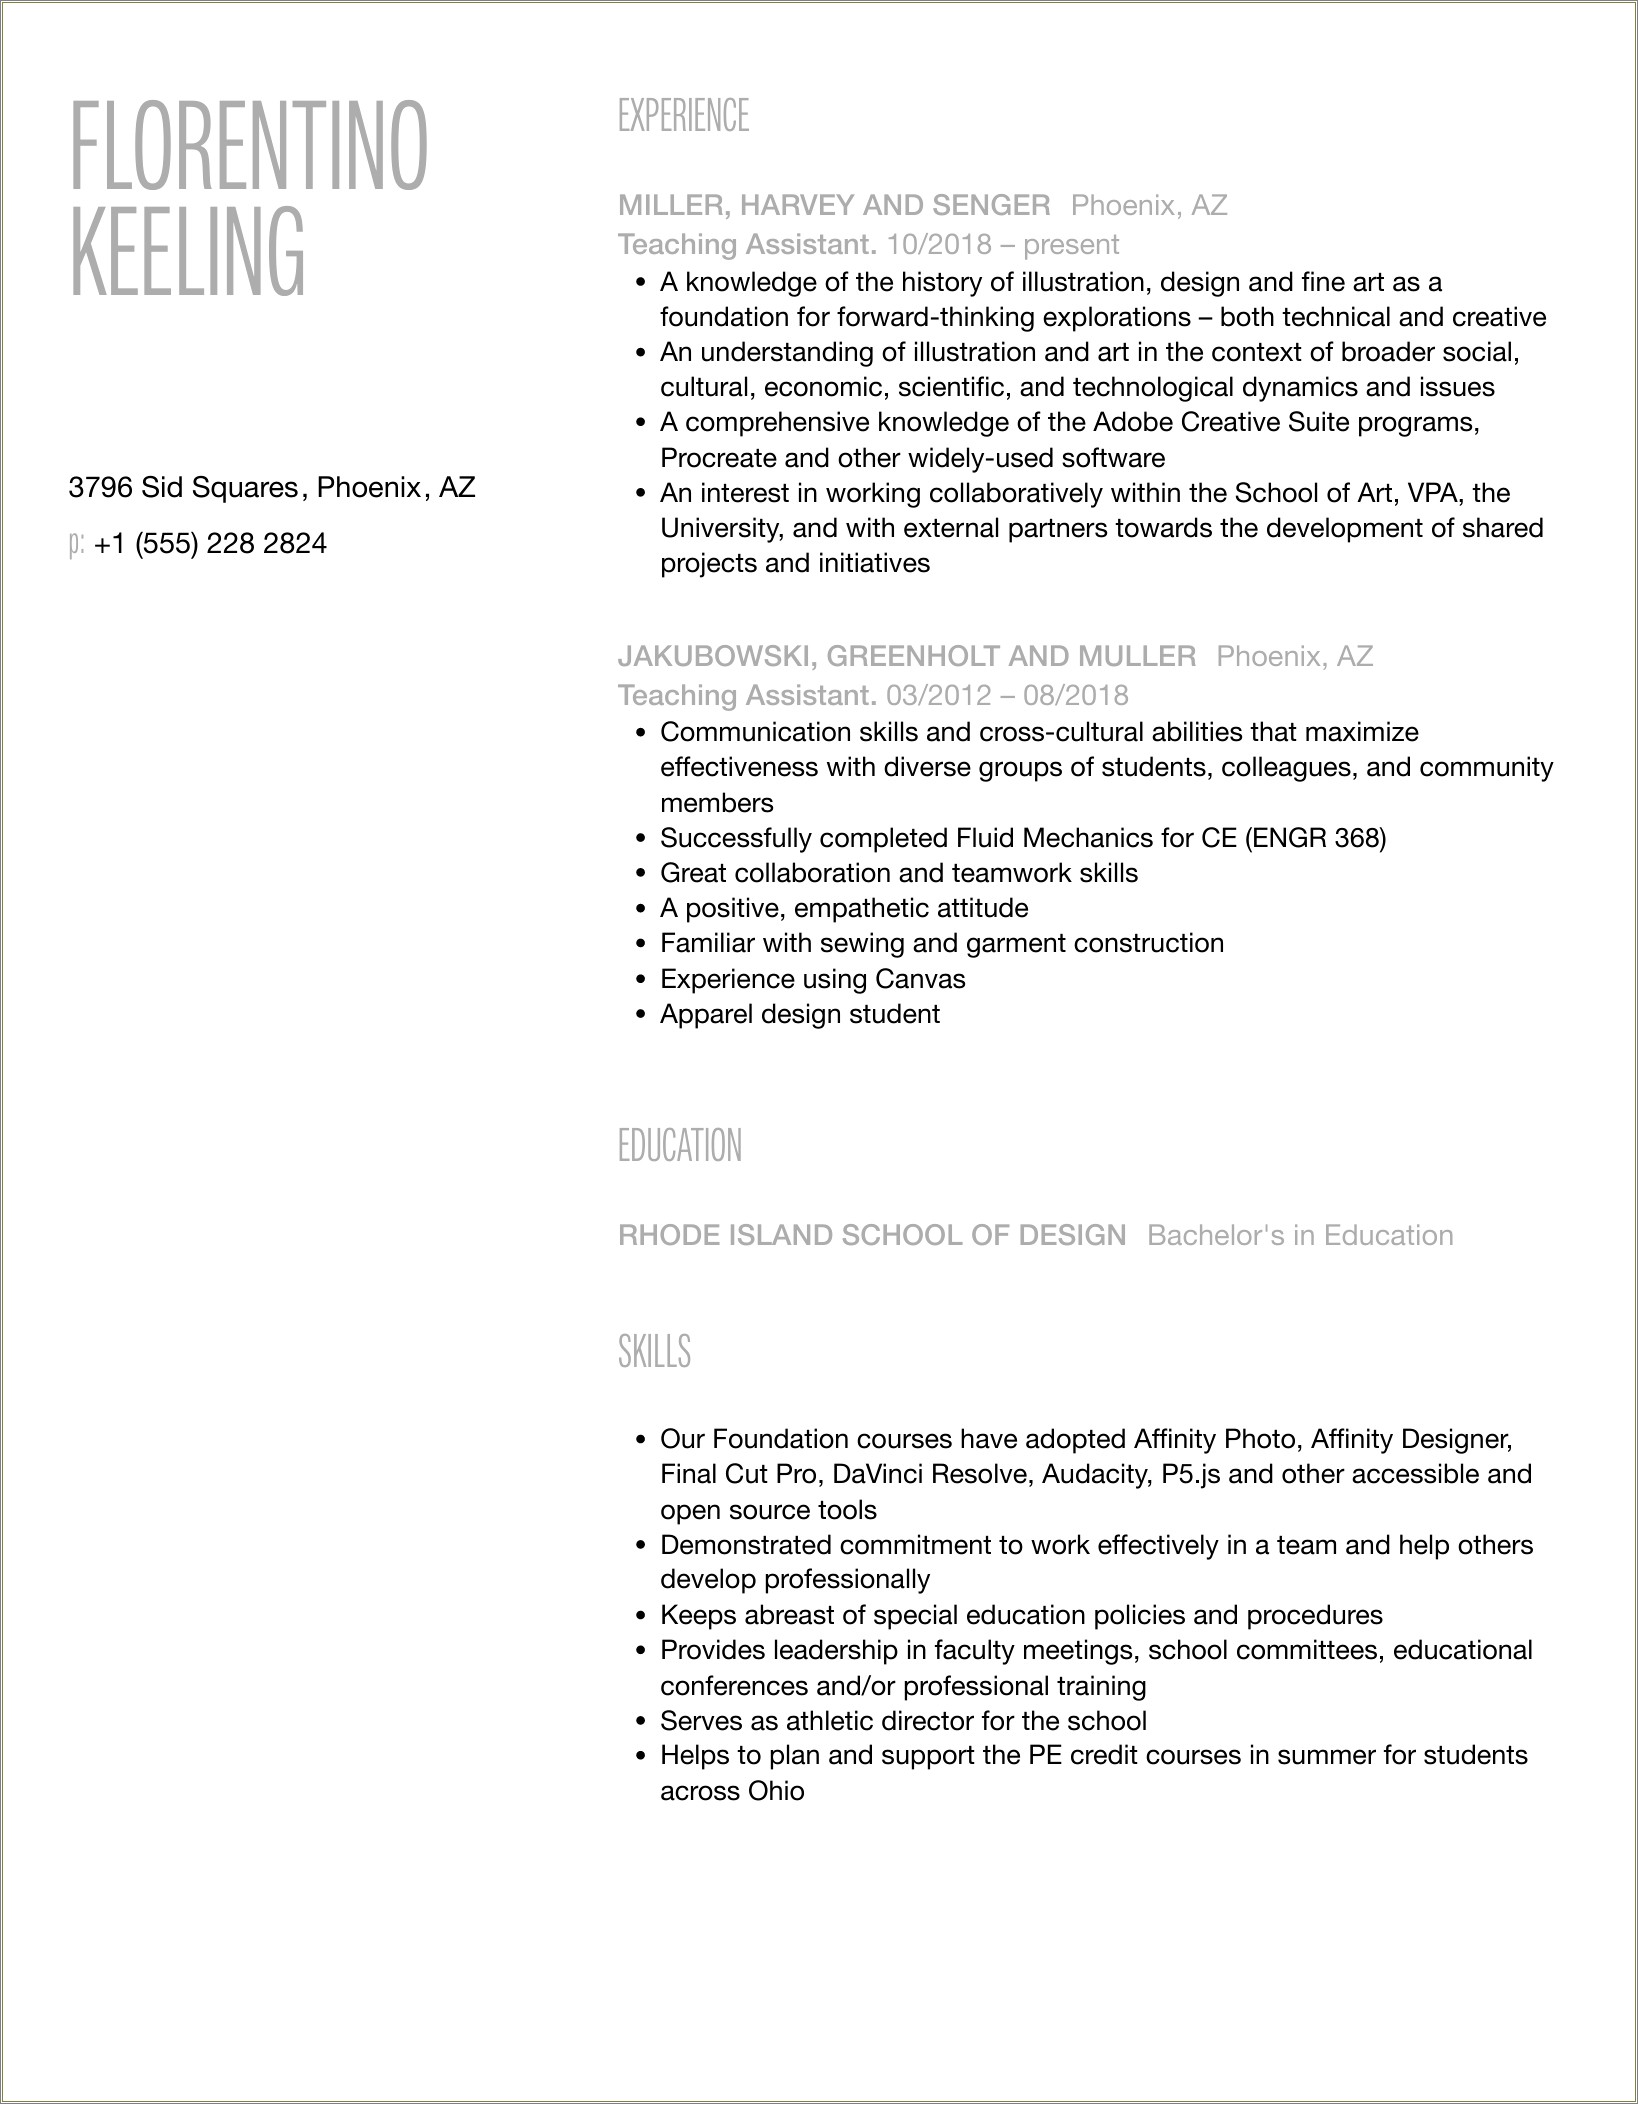 Writing About Teaching Assistant Experience In Resume